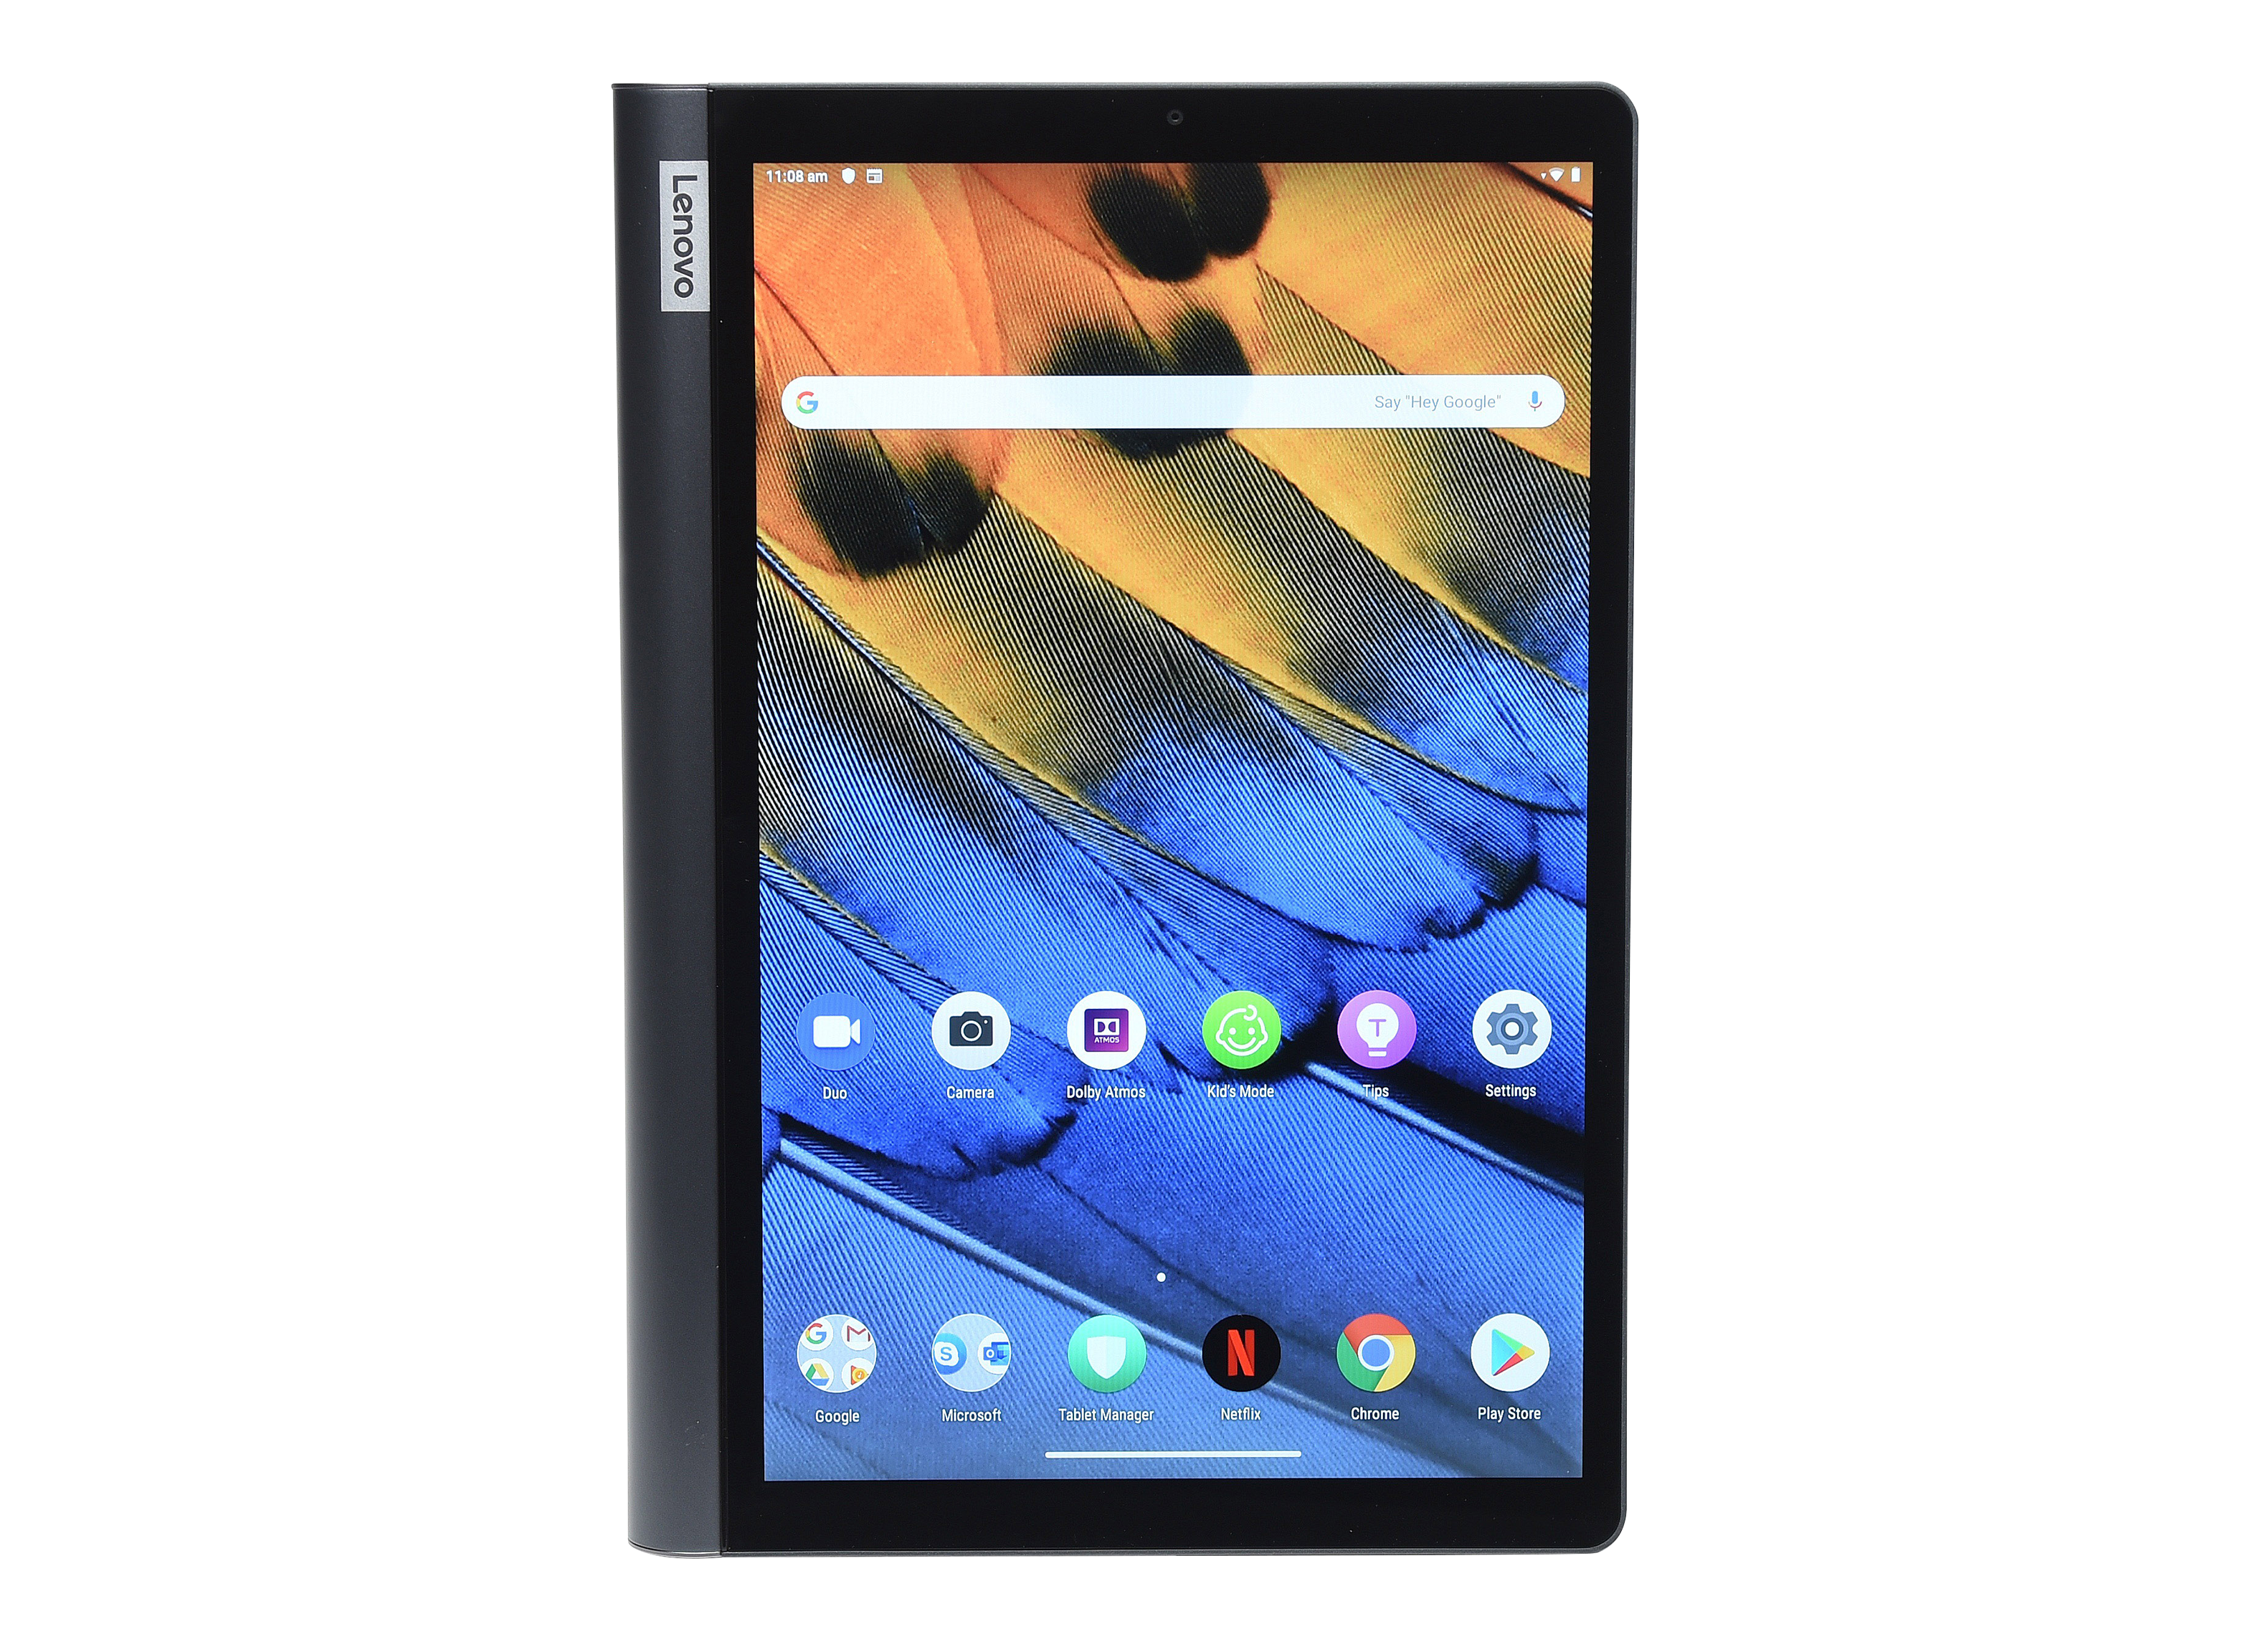 Lenovo Yoga Smart Tab with Google Assistant (64GB) Tablet Review